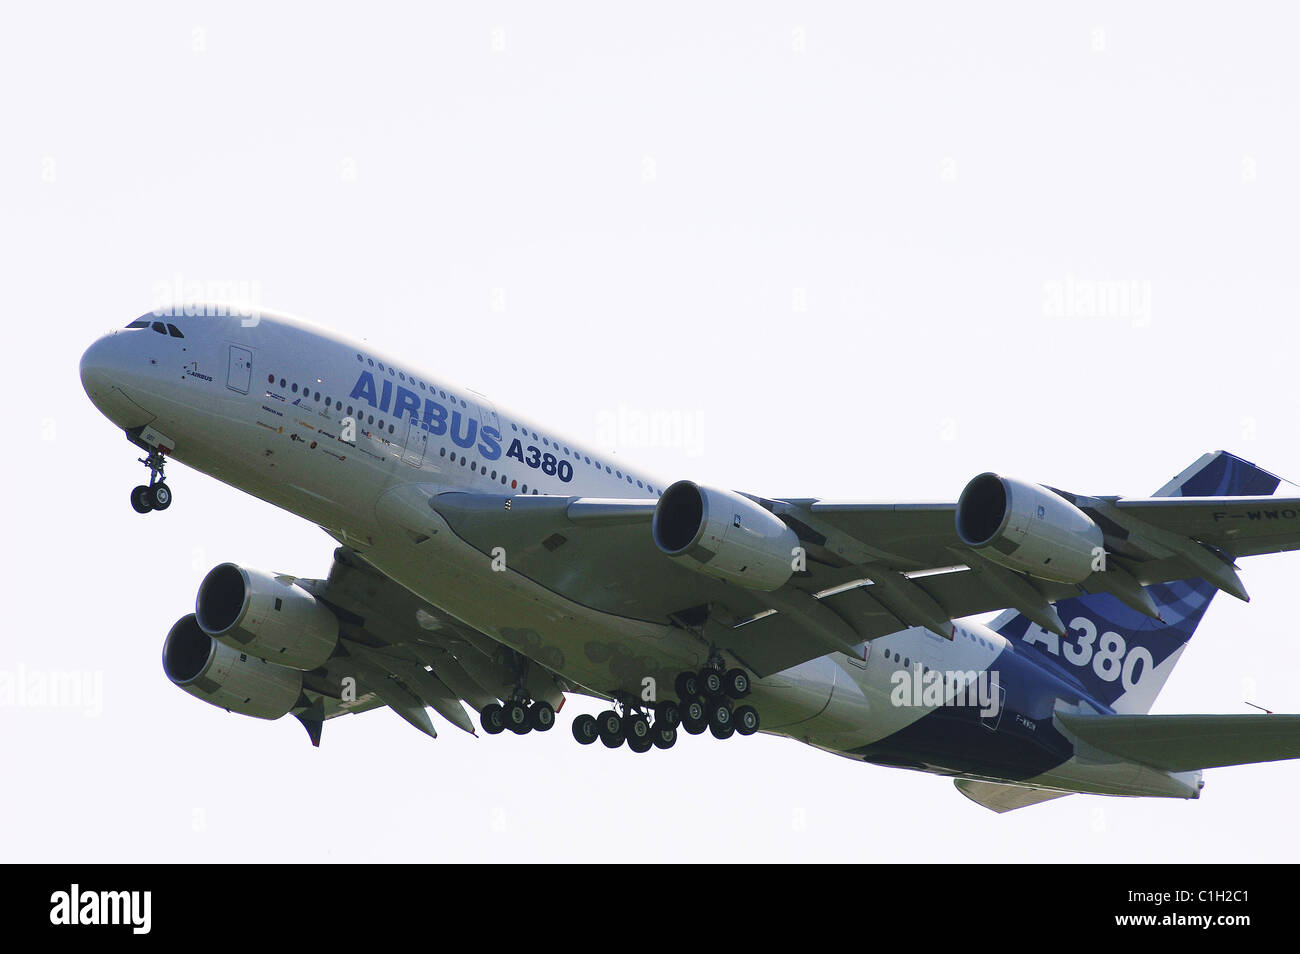 France Haute Garonne Toulouse Blagnac first flight of the Airbus A380 teh biggest airliner in aviation history (27th April 2005) Stock Photo